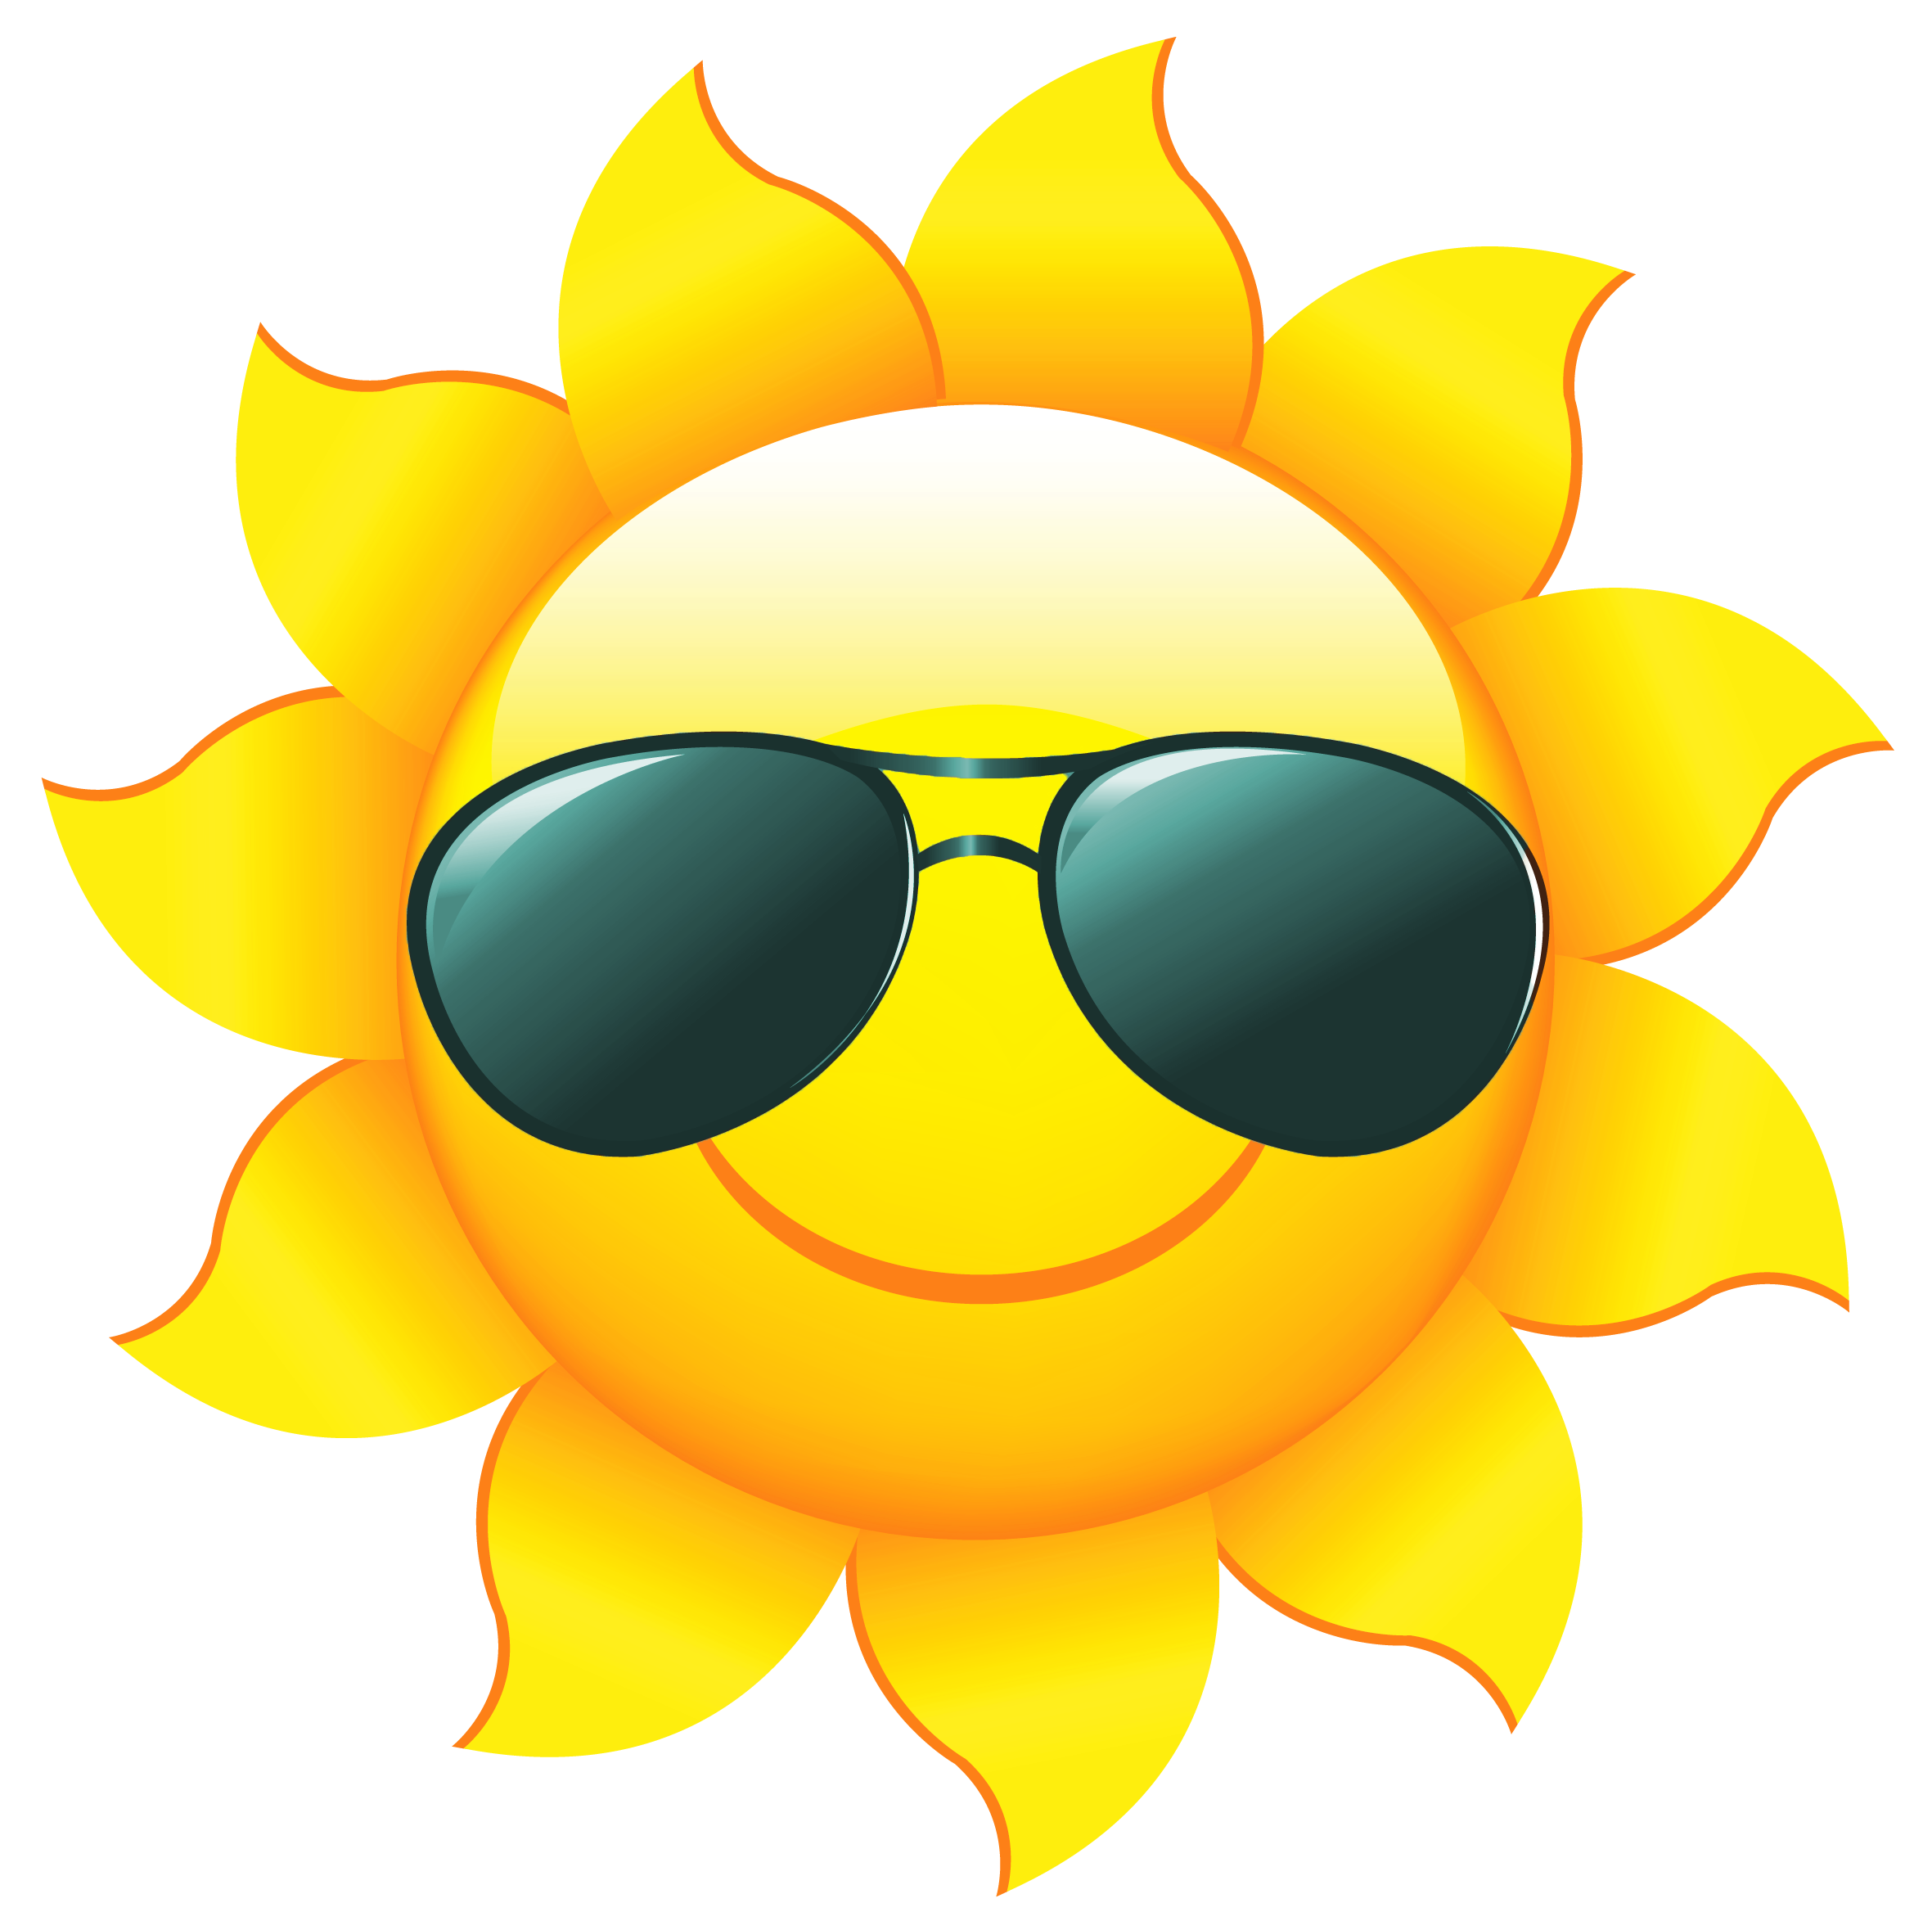 Sun Clipart Free Images At Cl